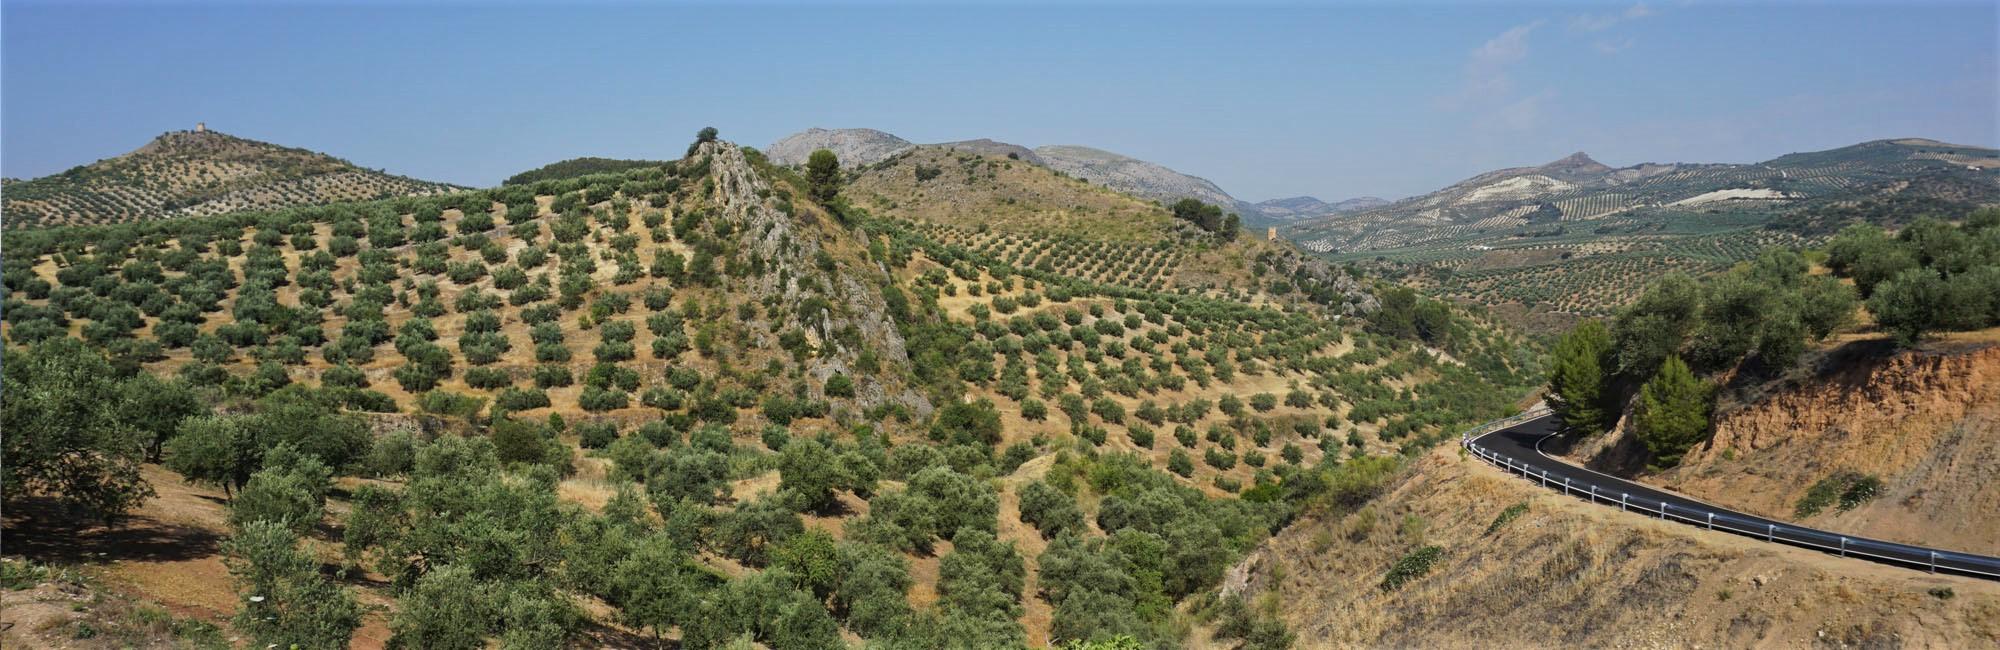 Olive groves in andalucia